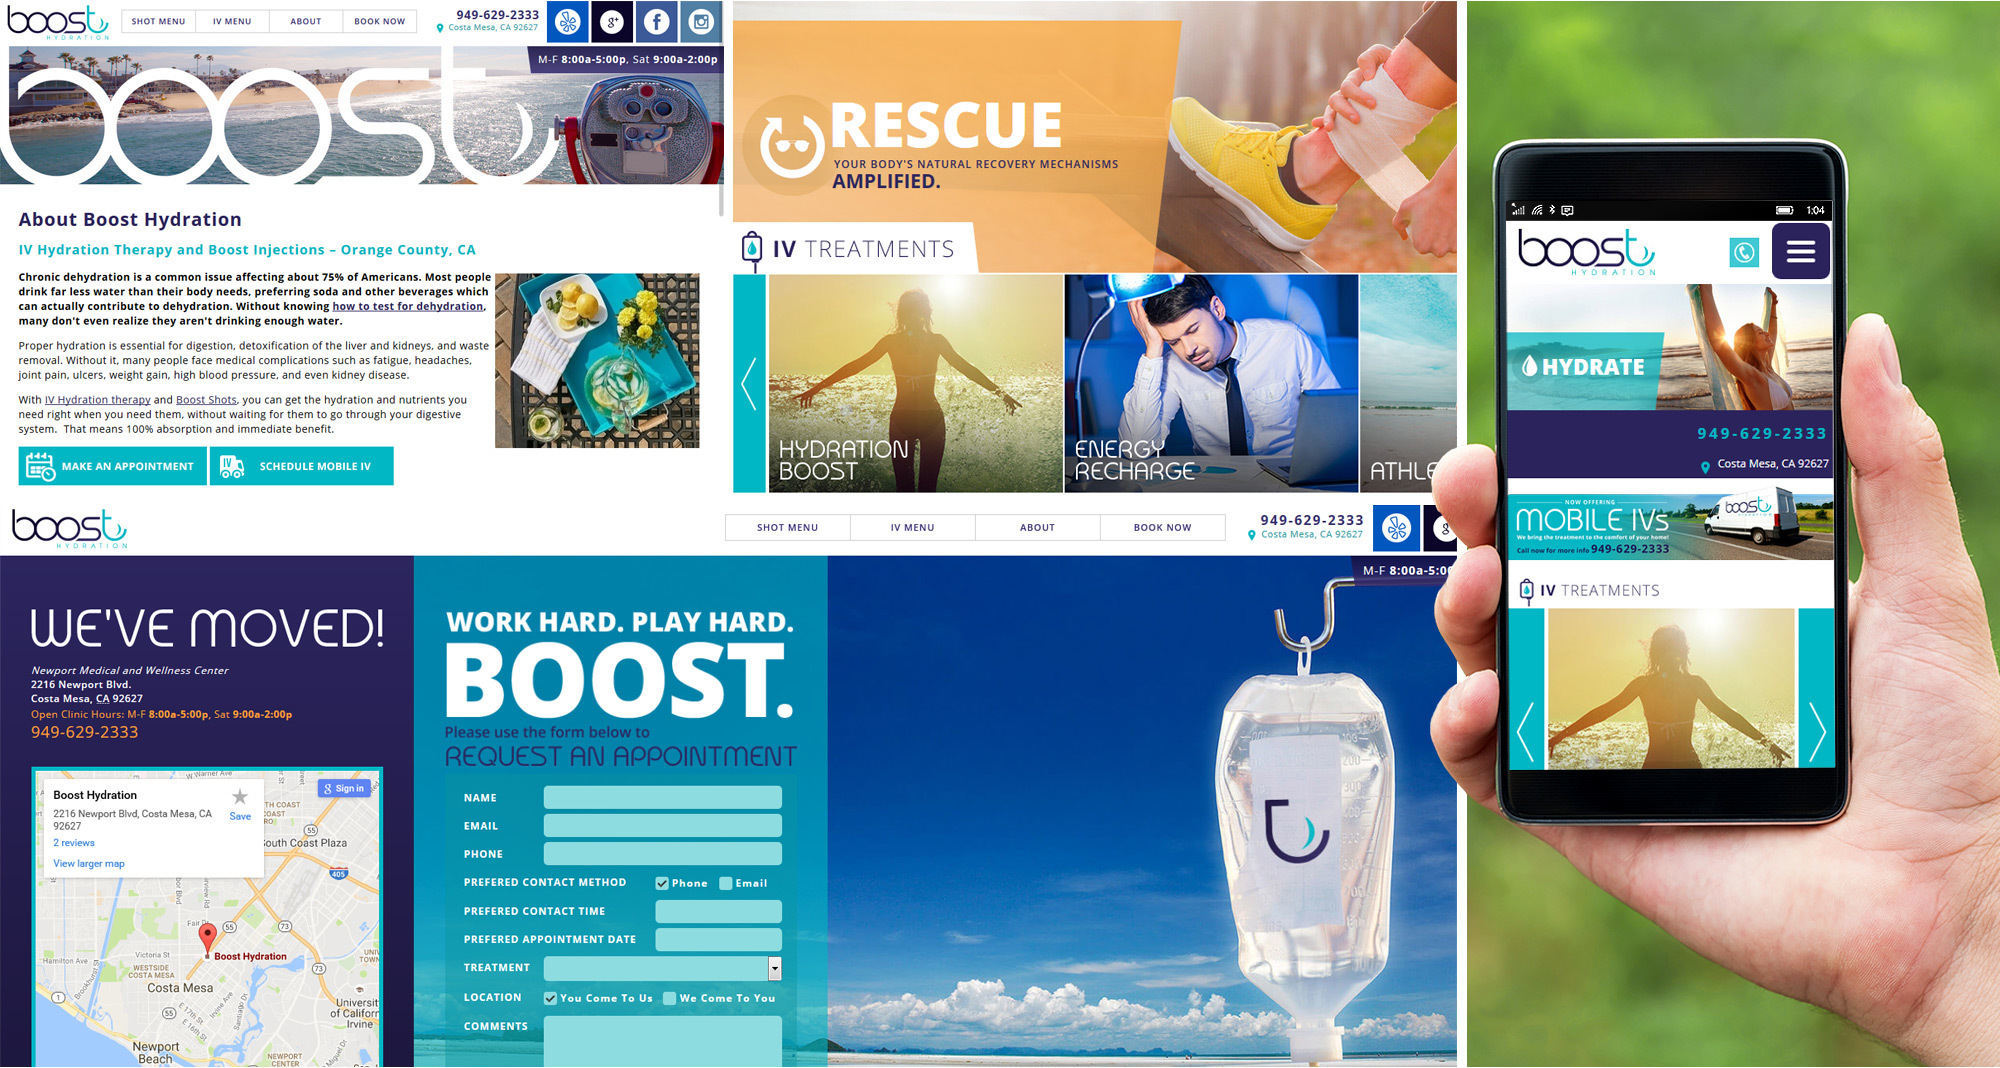 Boost Hydration Website Designed by iNET